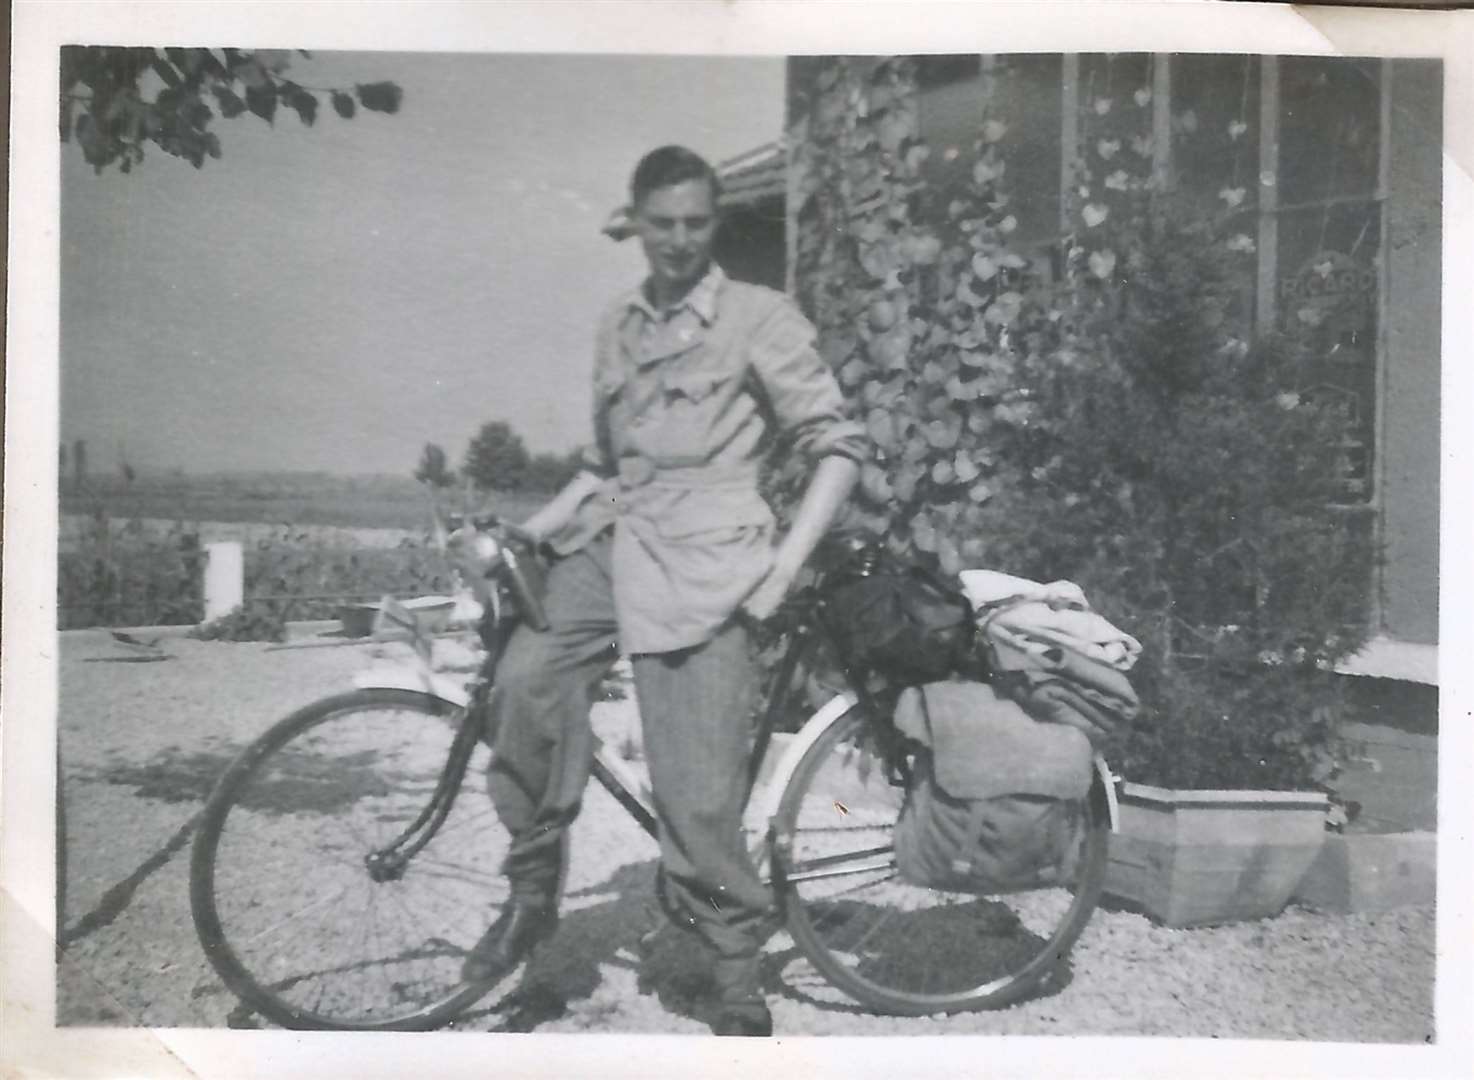 John Holland took part in a French cycle trip from September 14-30 in 1951